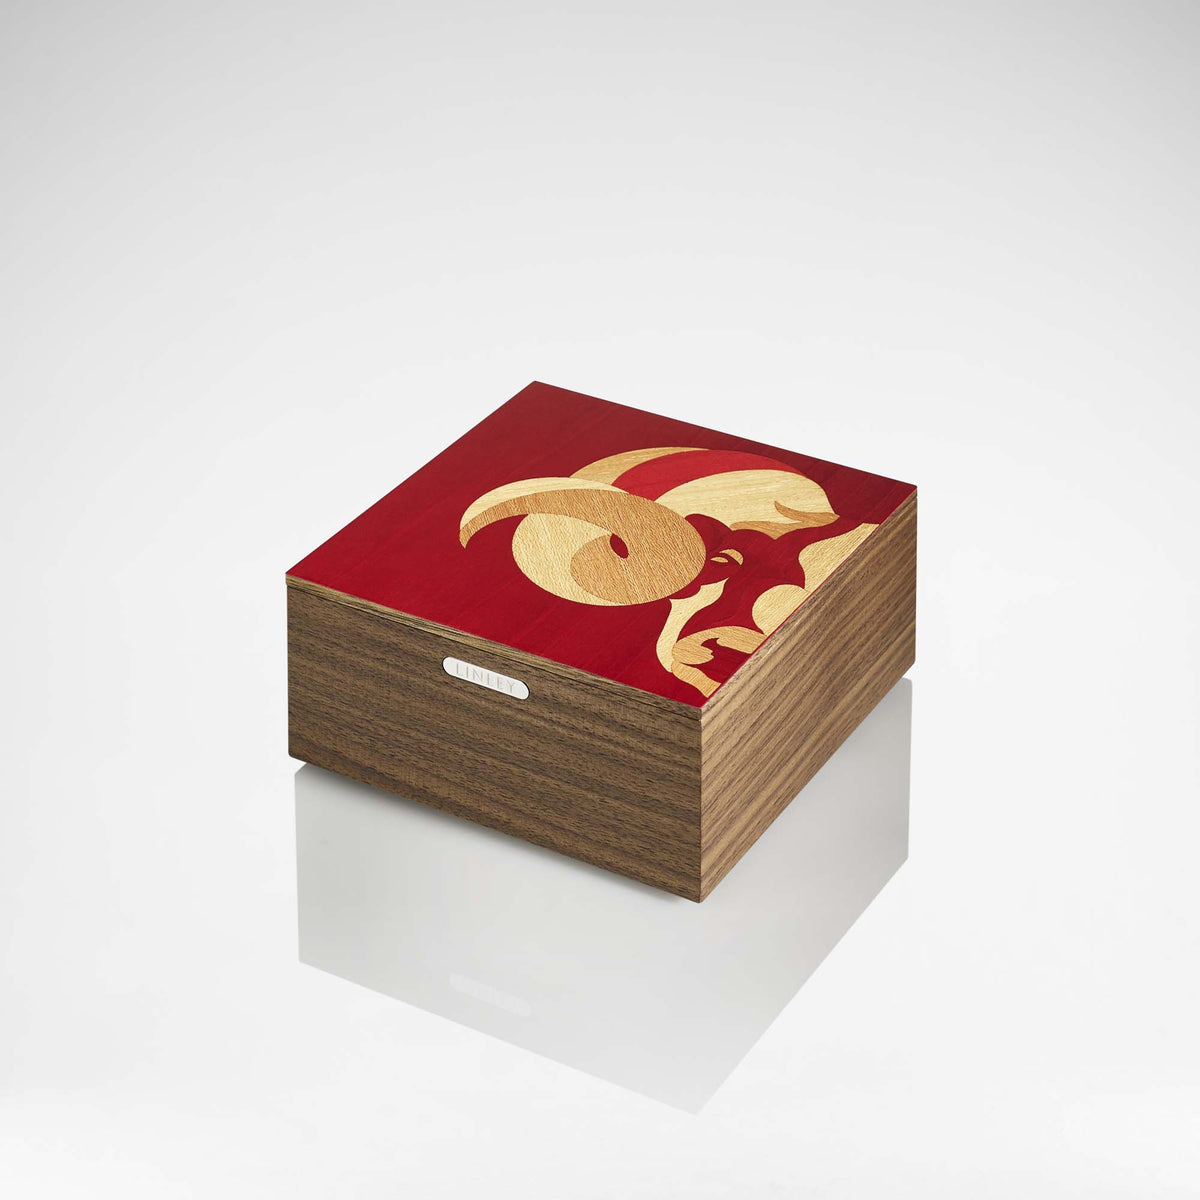 Zodiac Box - Aries | Luxury Home Accessories & Gifts | LINLEY